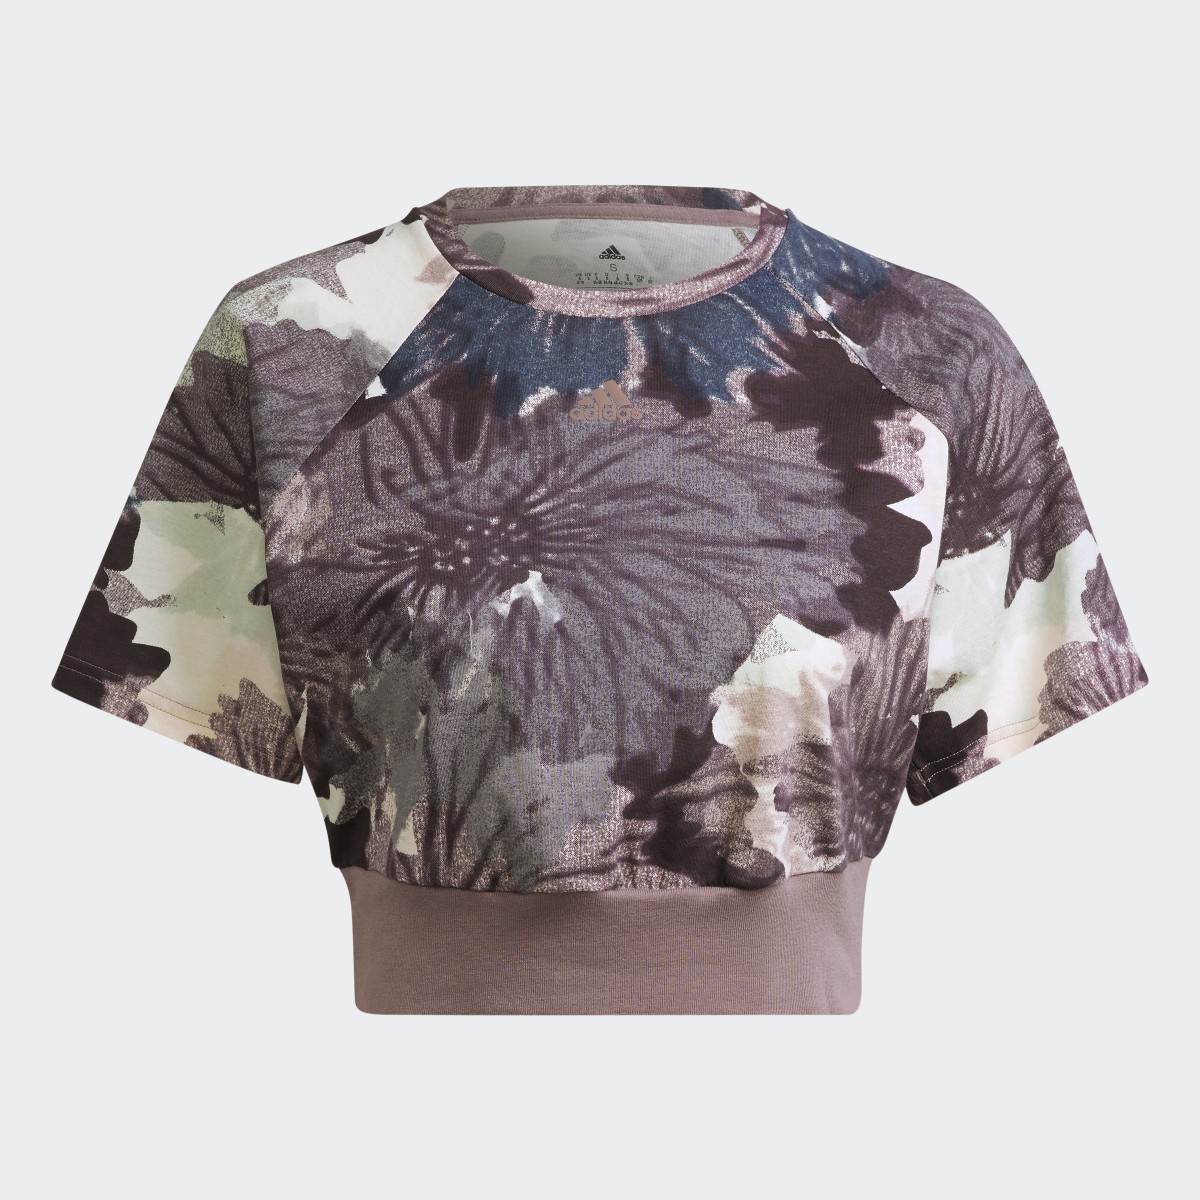 Adidas T-shirt Cropped Allover Print. 5